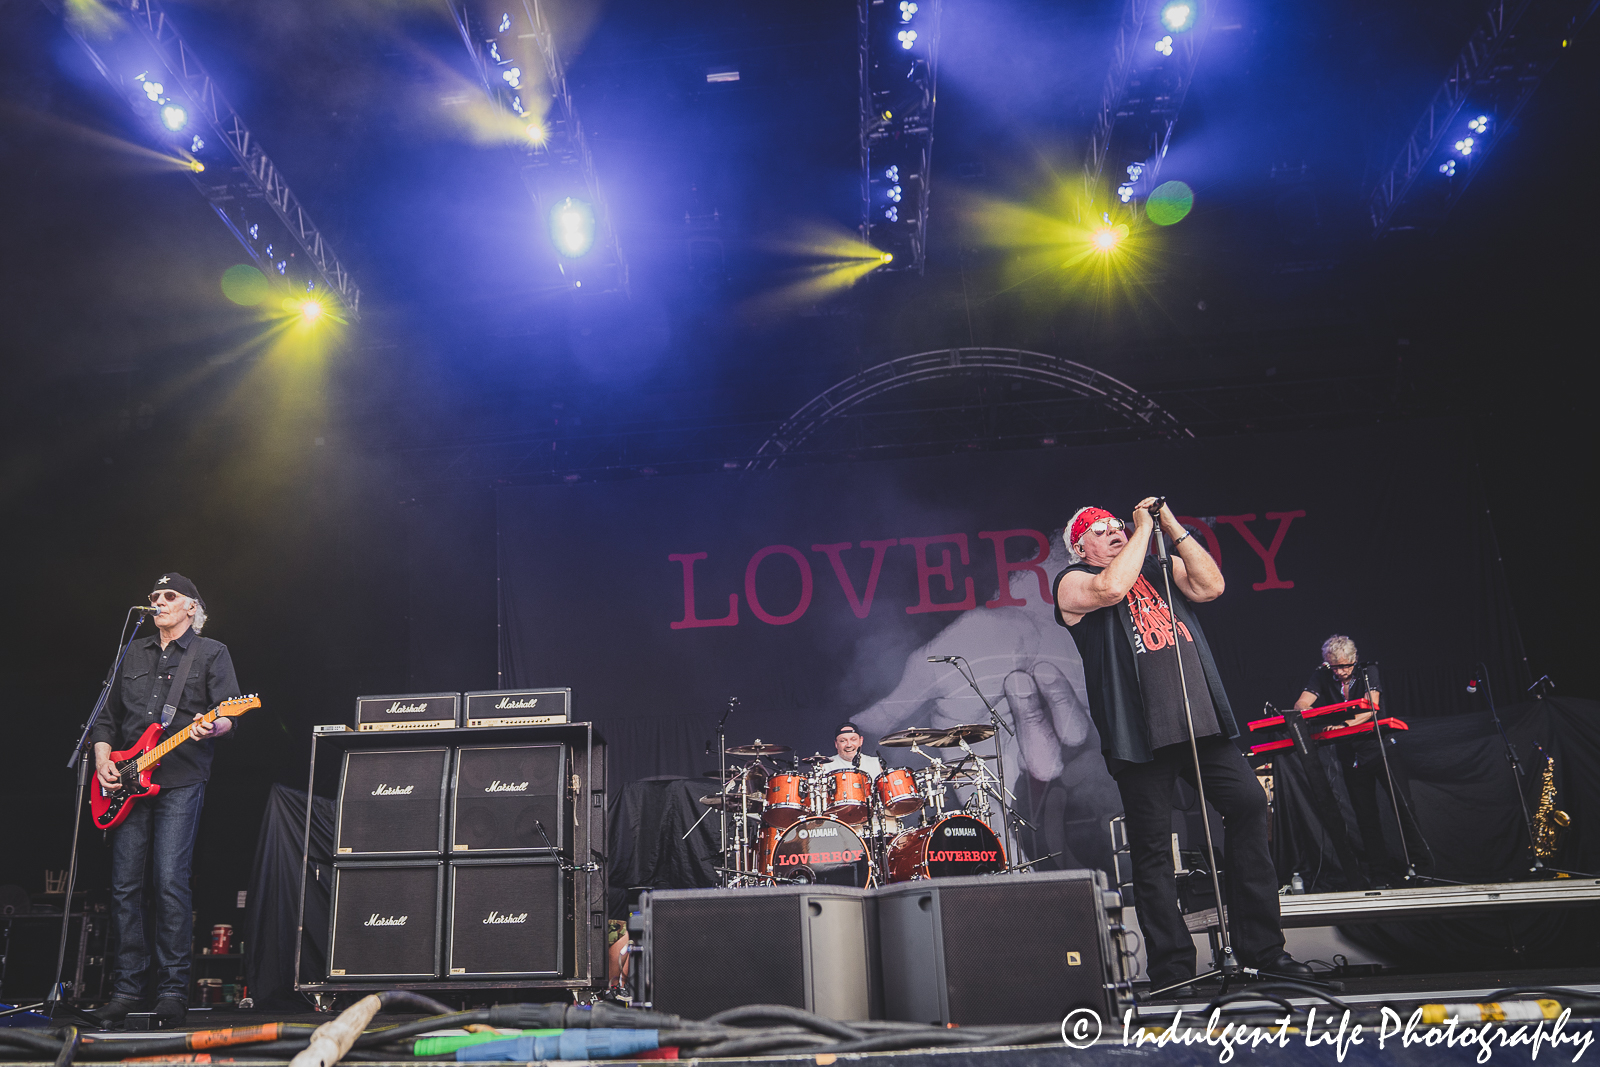 Canadian rock band Loverboy performing "Queen of the Broken Hearts" at Starlight Theatre in Kansas City, MO on July 18, 2023.